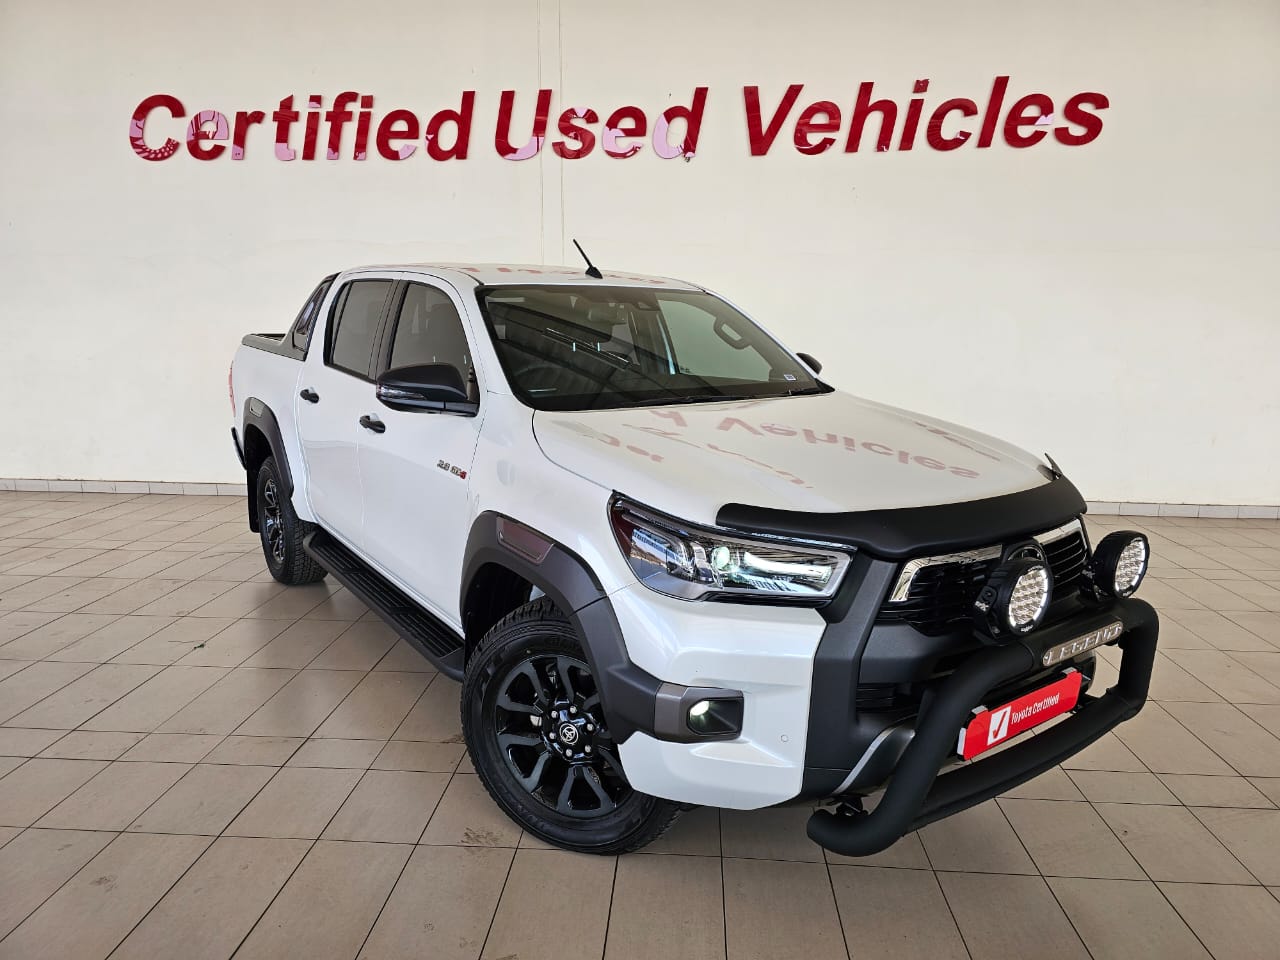 Toyota Hilux Cars for Sale in North West, South Africa